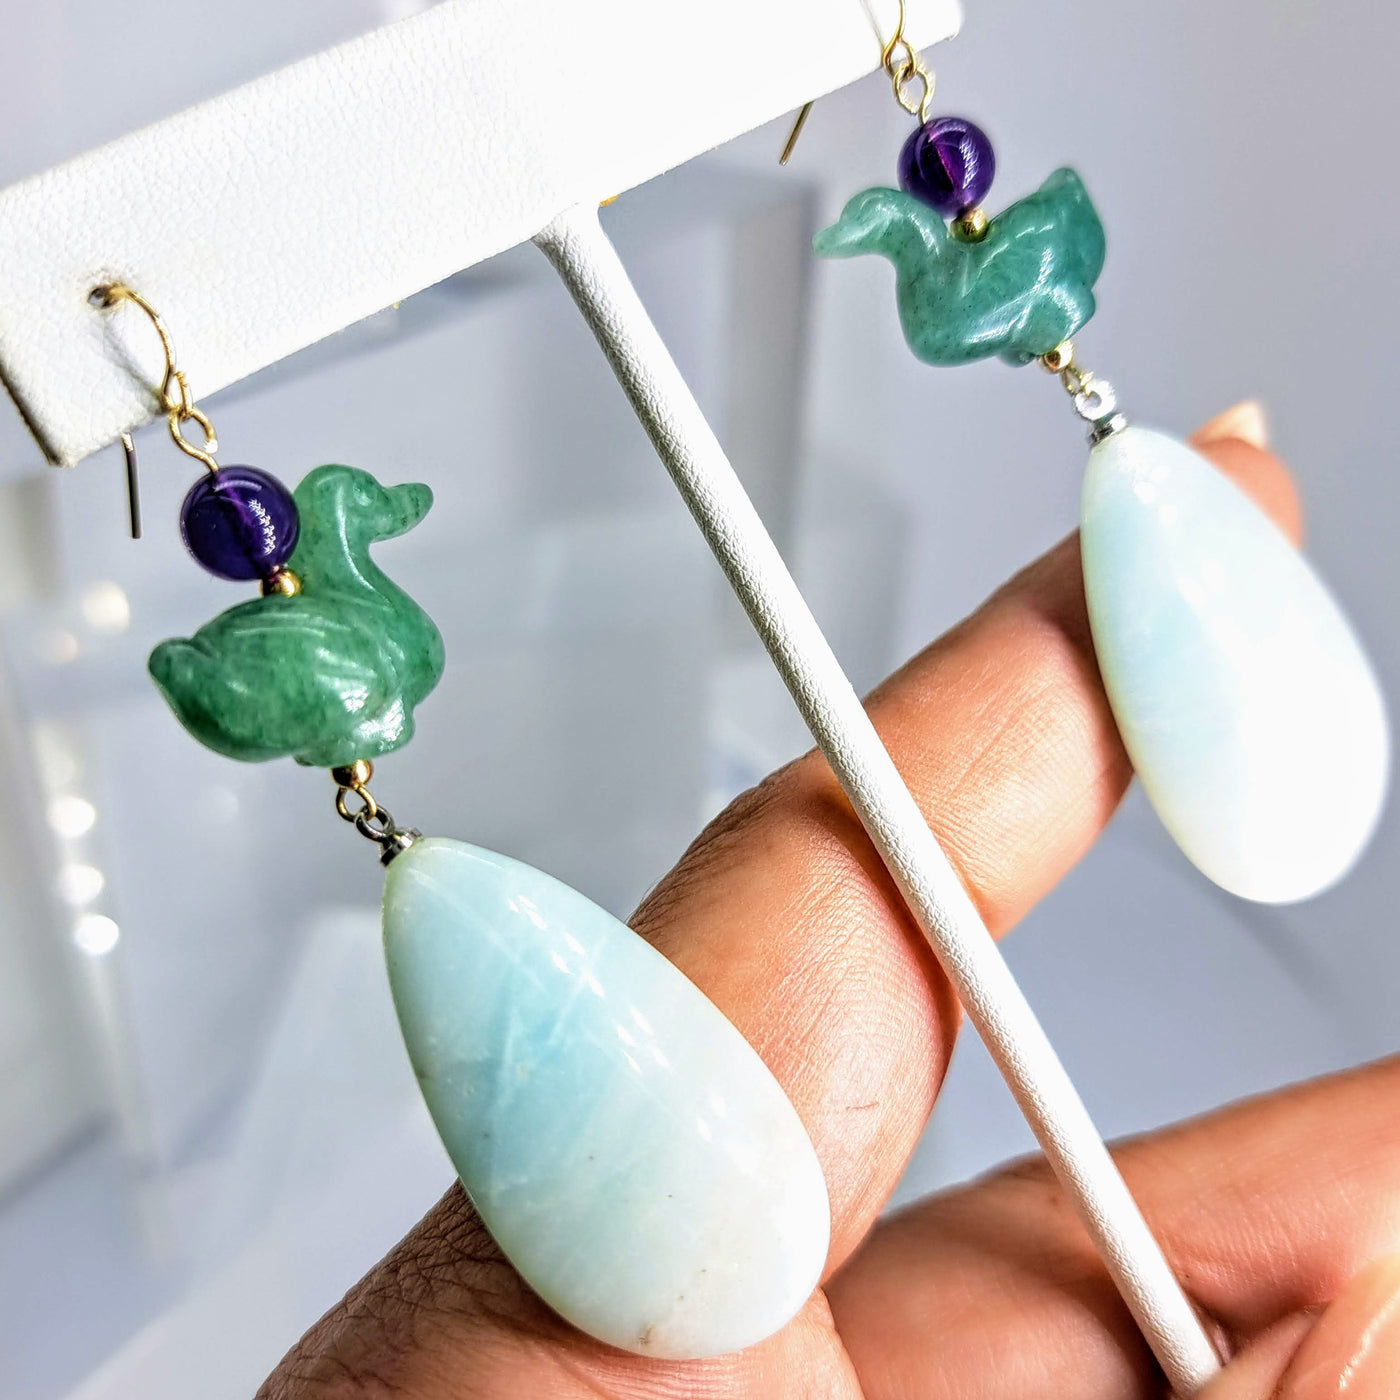 "Lucky Duck" 2.75" Earrings By Barb - Aventurine, Amethyst, Amazonite, 14K Gold, Sterling Accents